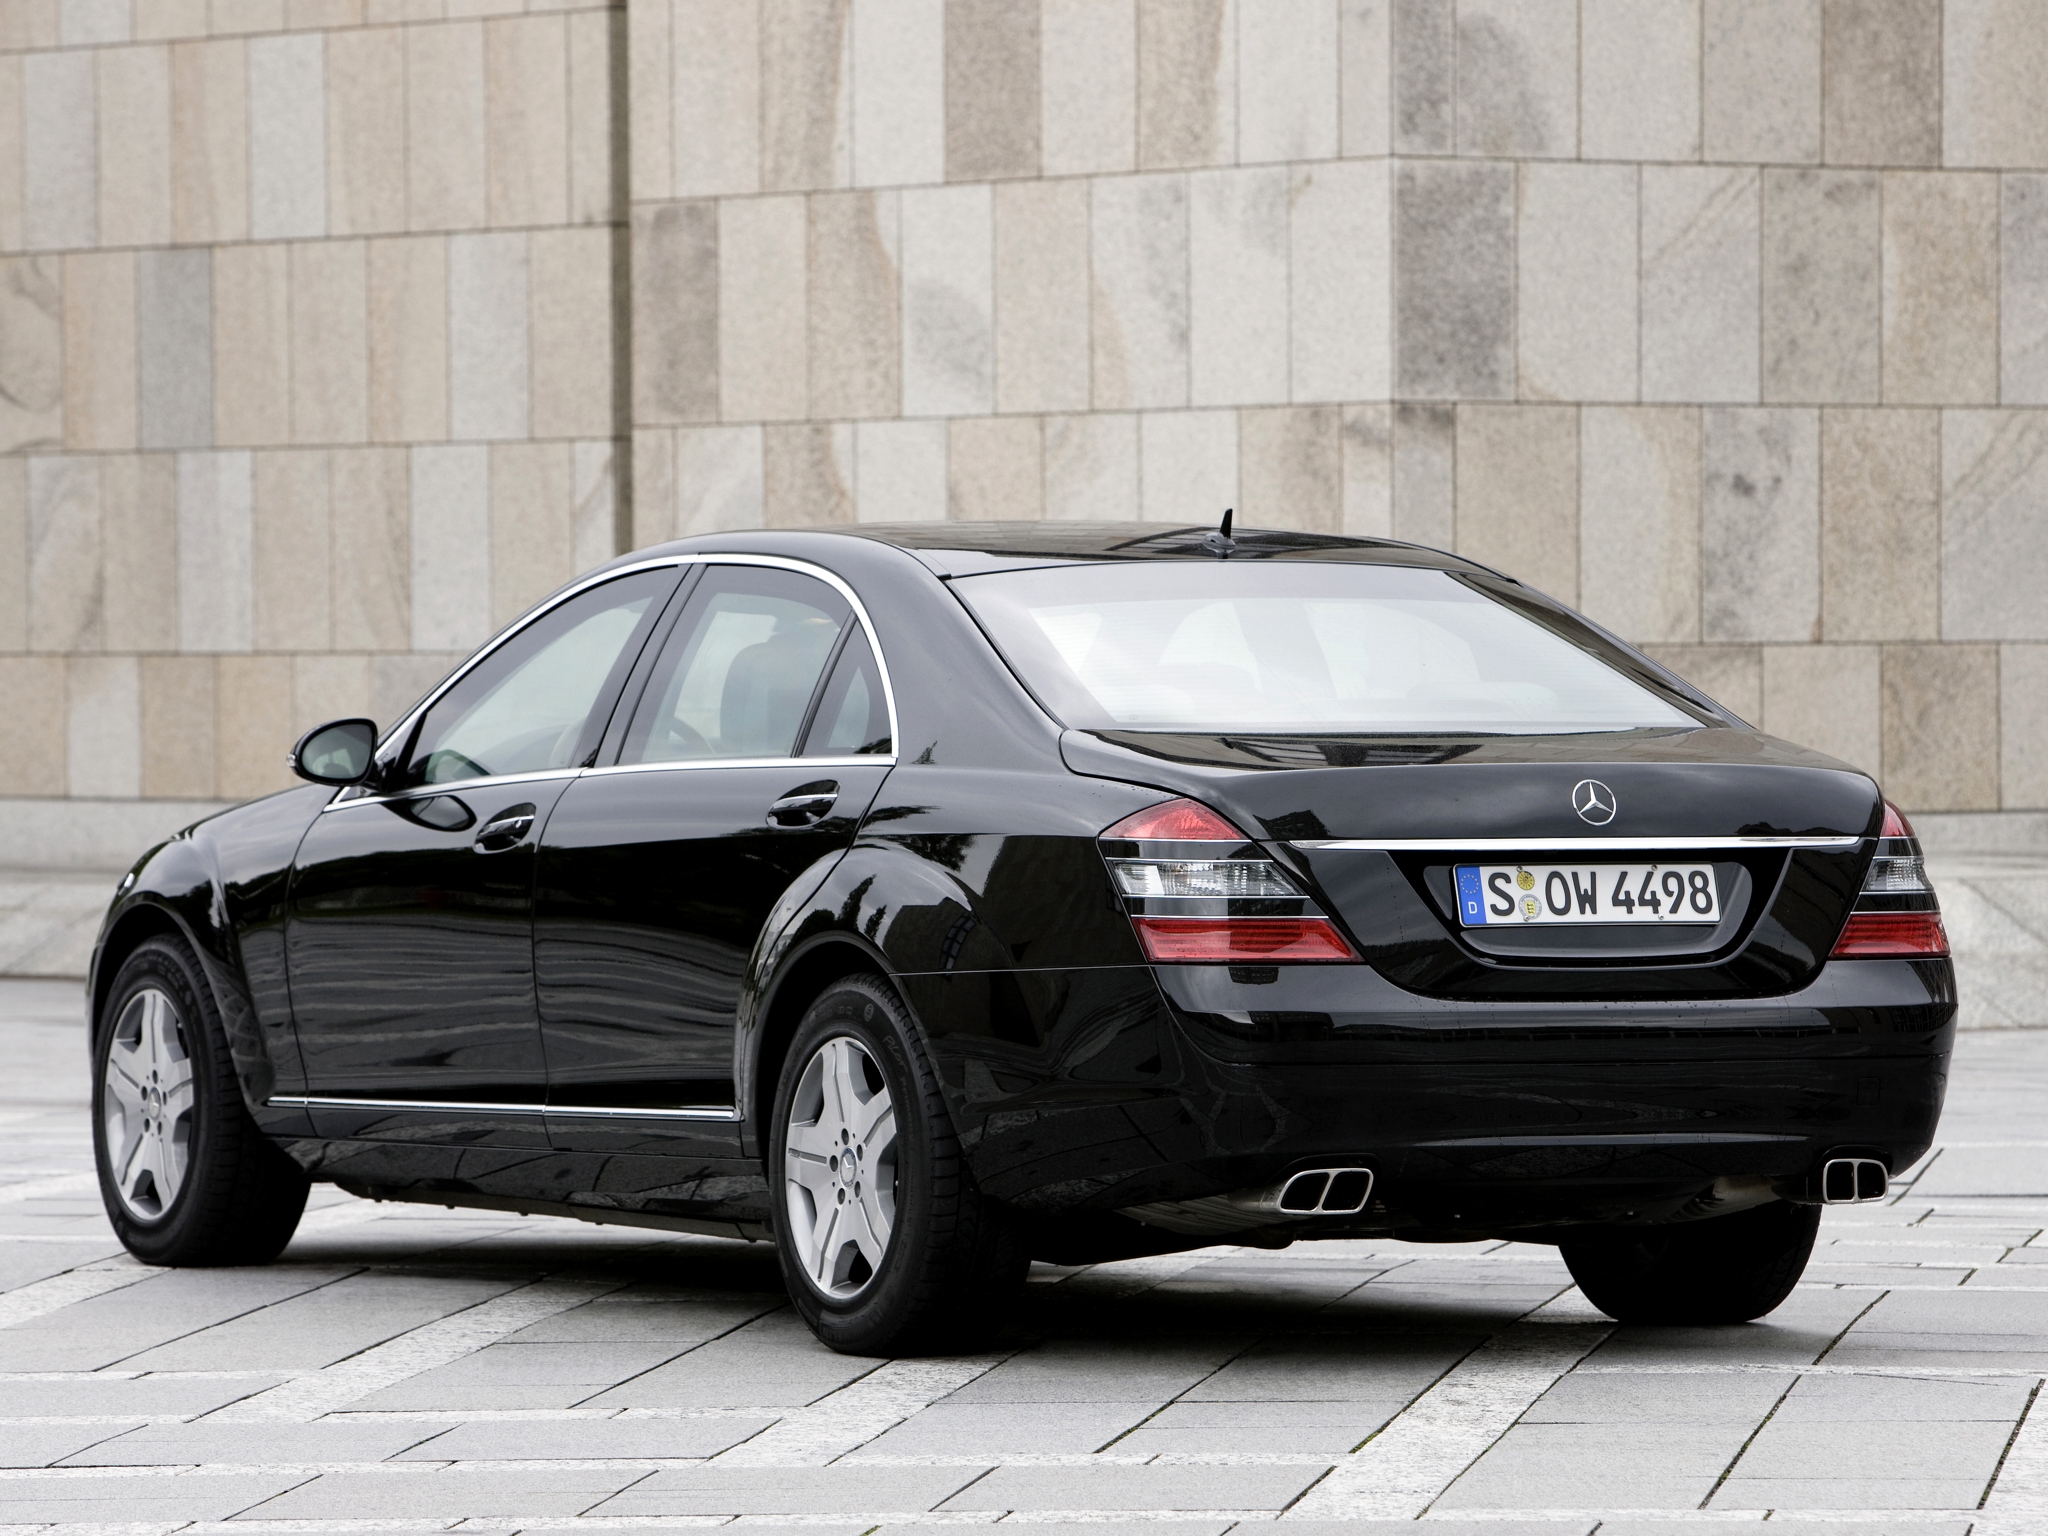 2007, Armored, Mercedes, Benz, S, 600, Guard, W221, Luxury Wallpaper